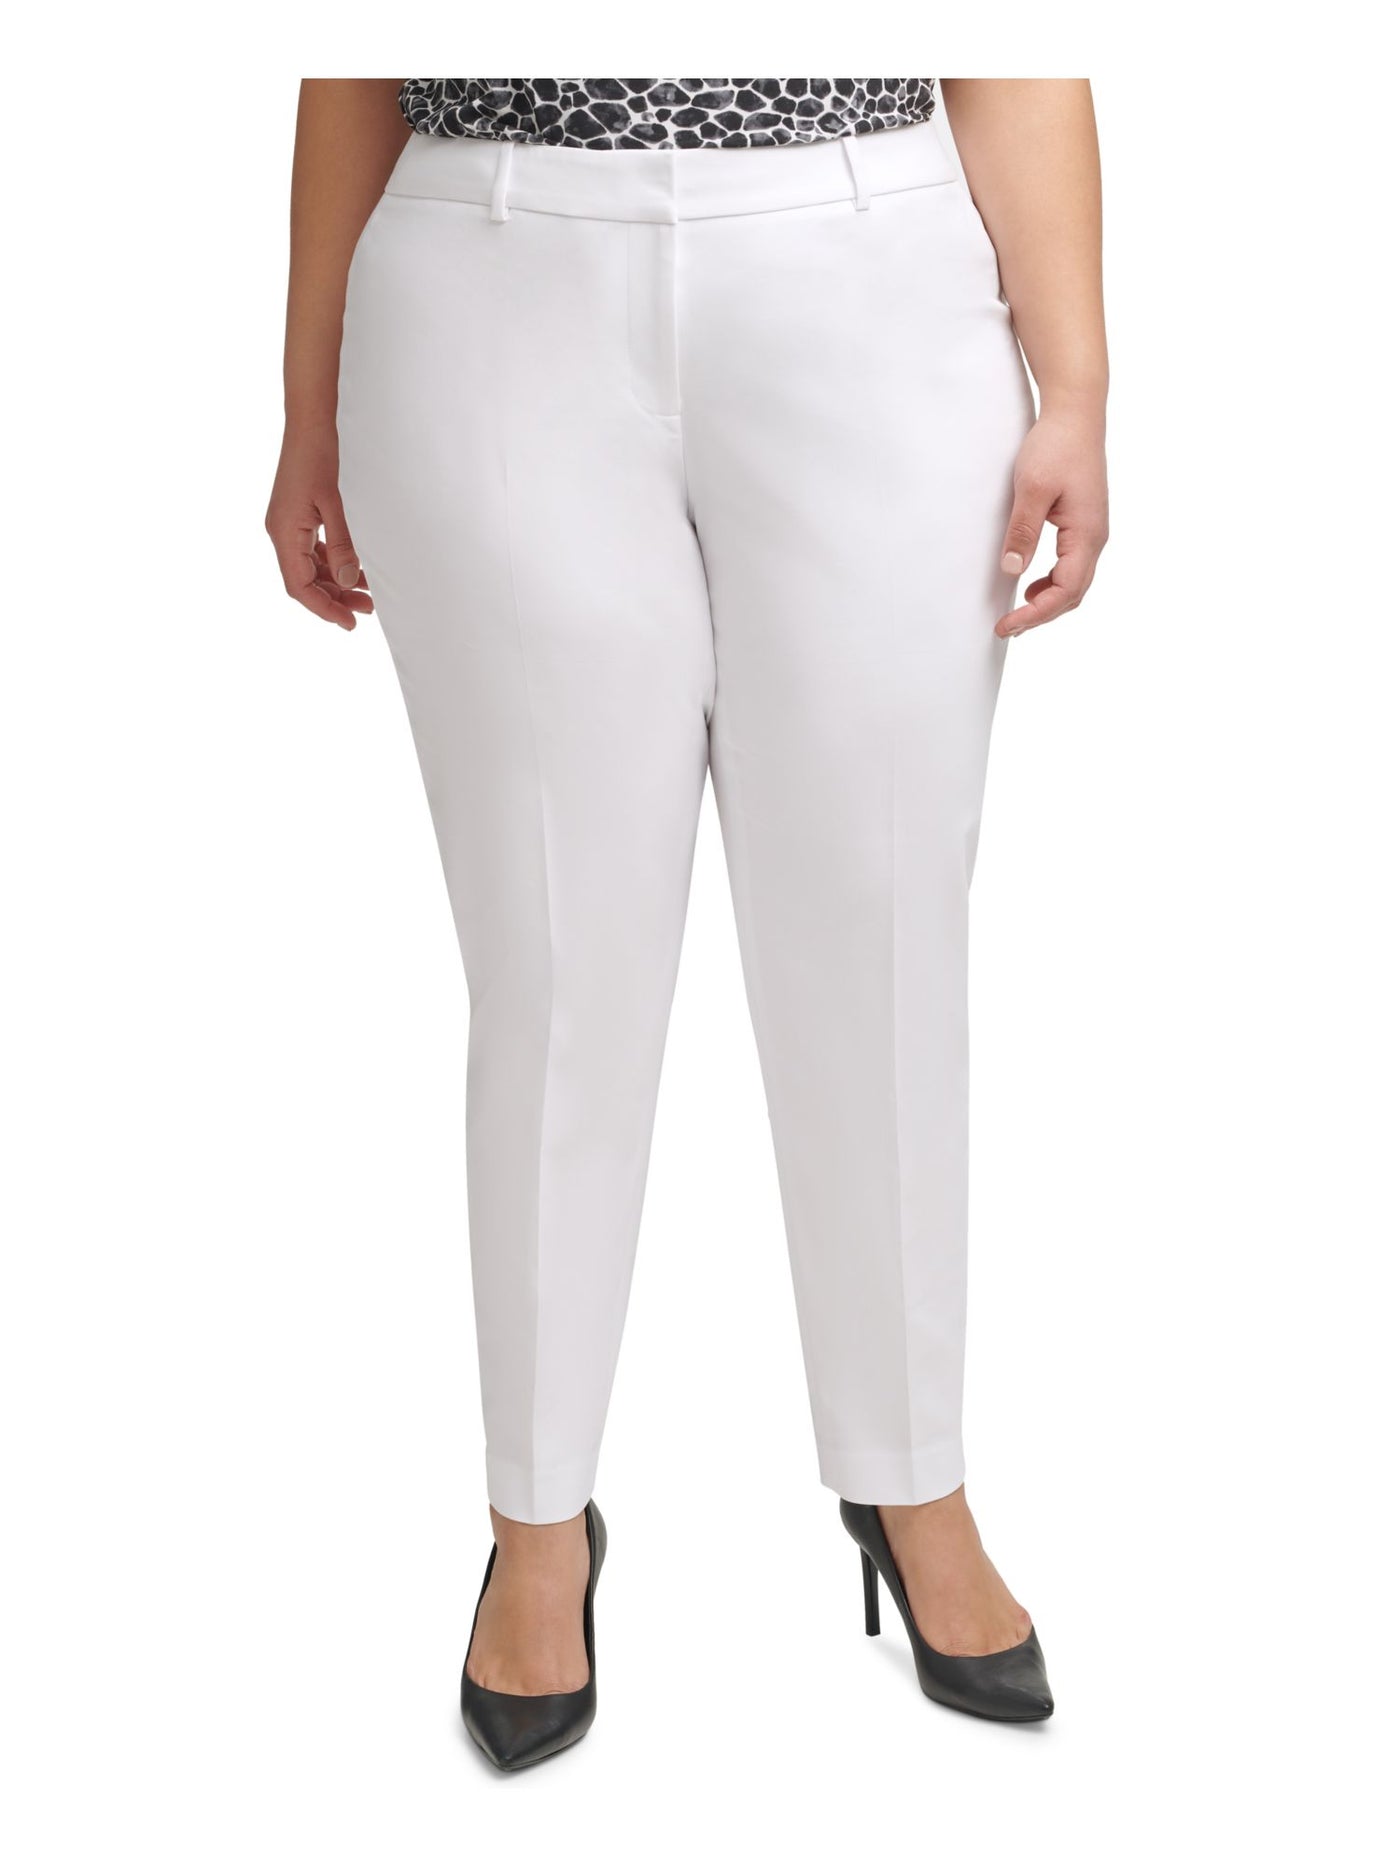 CALVIN KLEIN Womens White Stretch Zippered Slim-fit Mid-rise Wear To Work Straight leg Pants Plus 20W